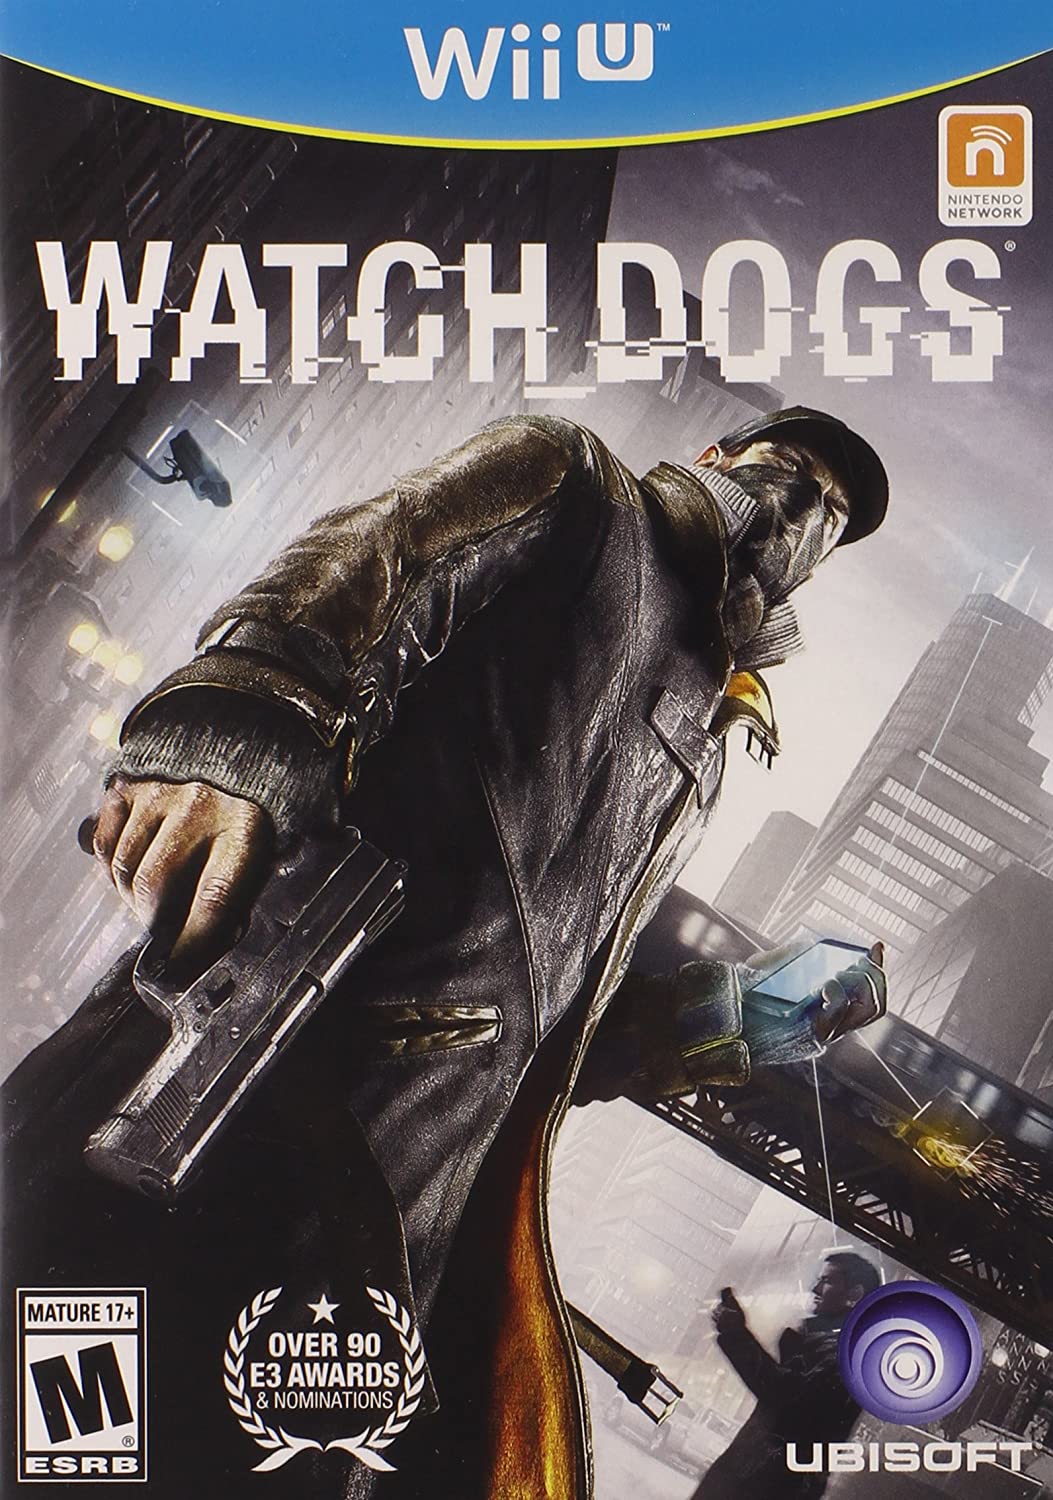 Watch Dogs - Darkside Records